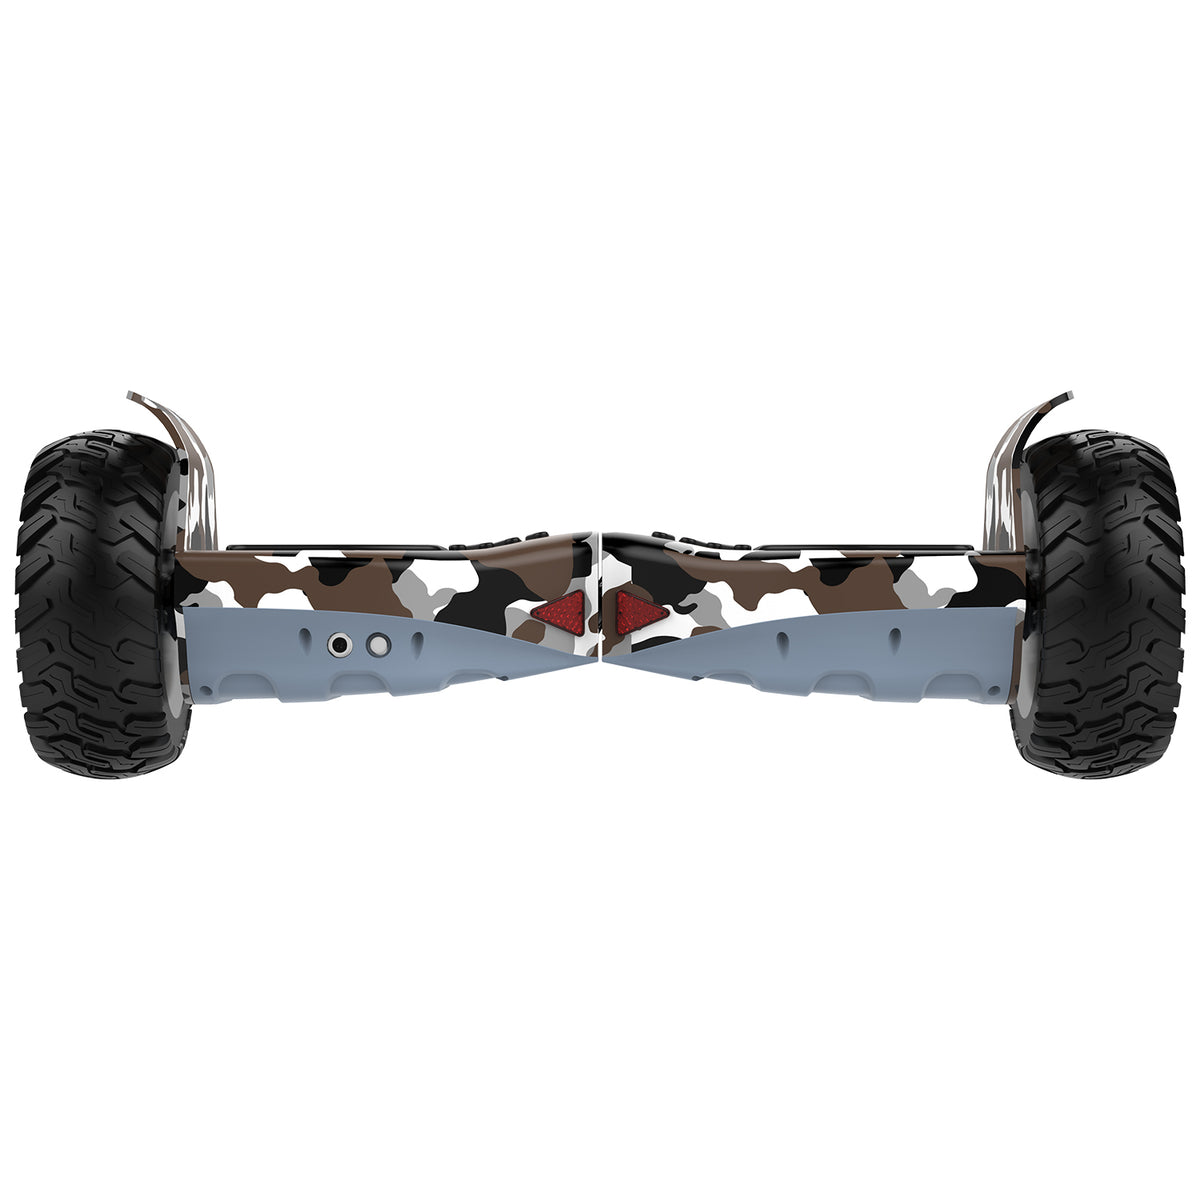 electric hoverboard, hoverboard hummer, all terrain hoverboard